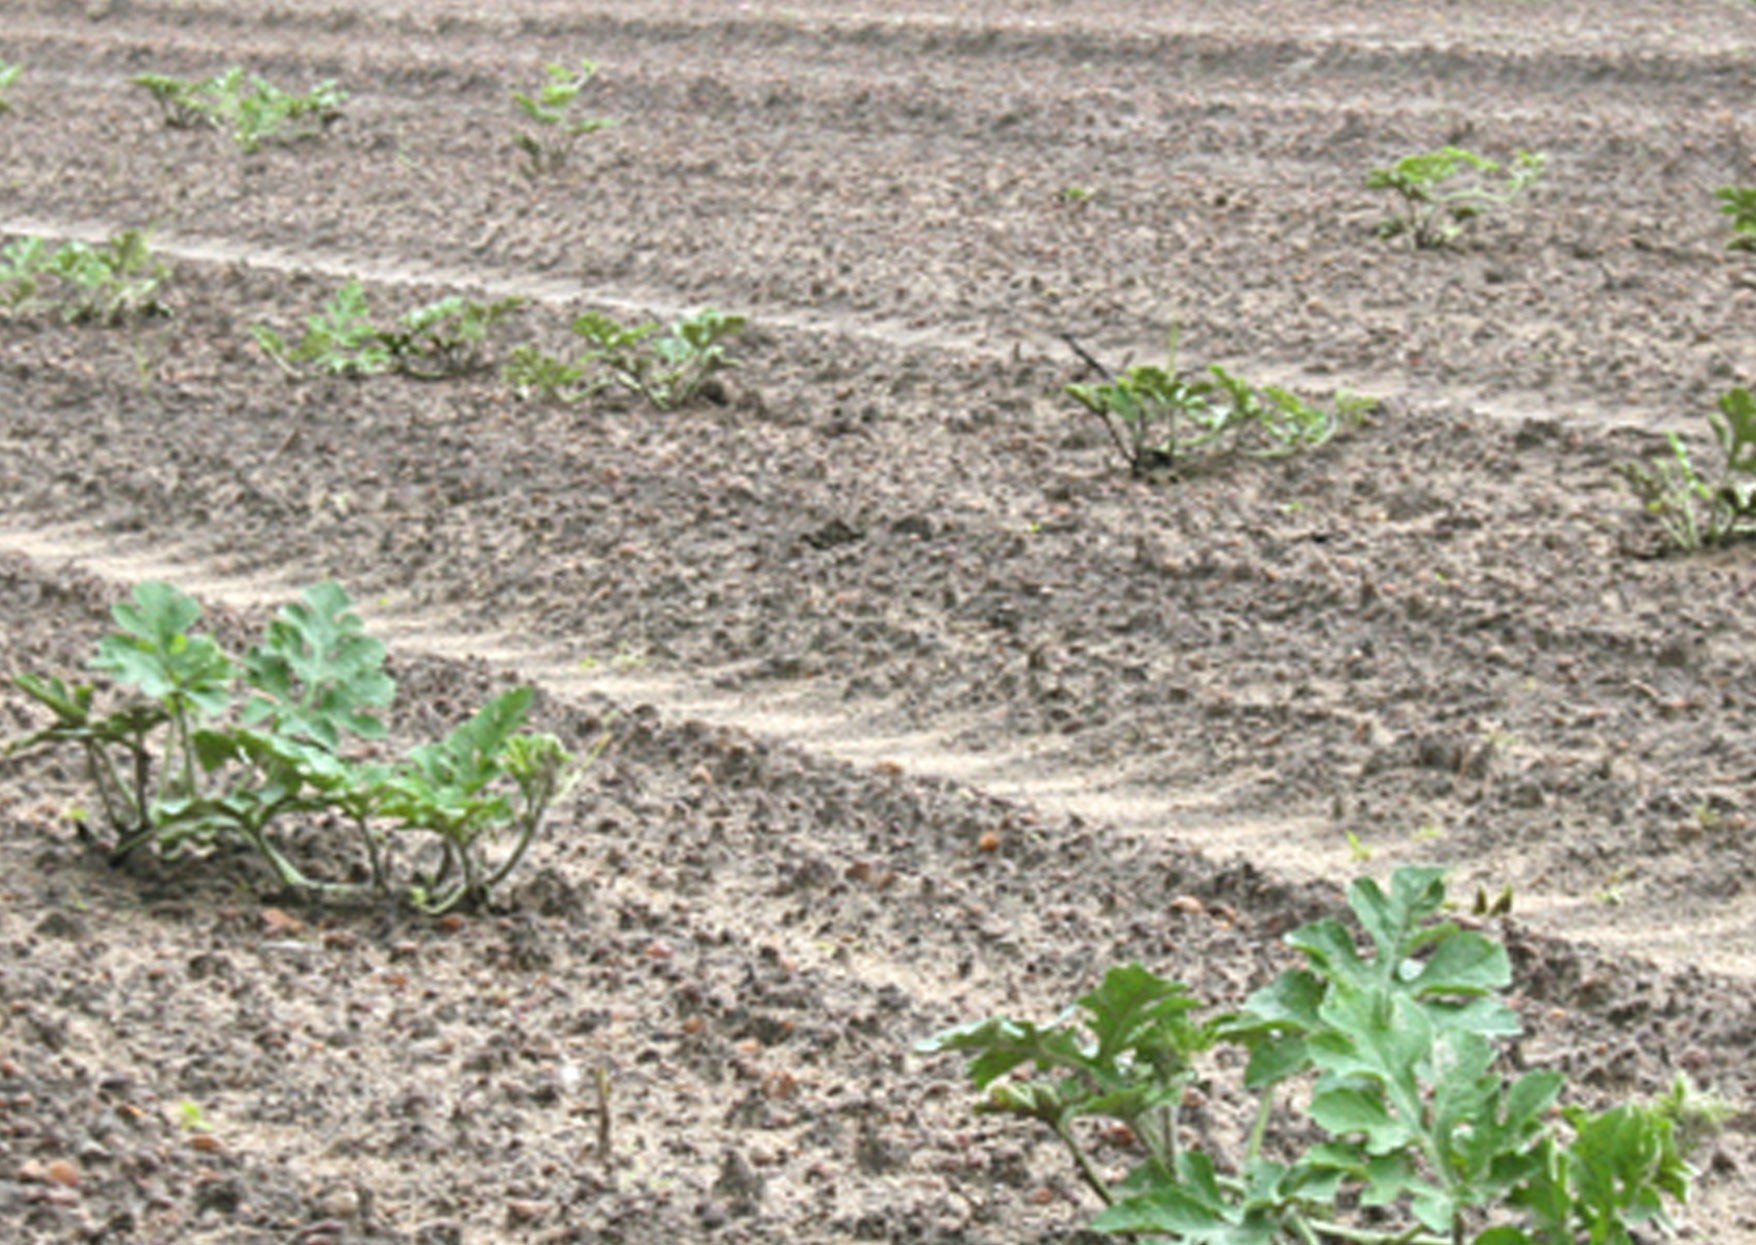 A field of watermelon plants in Ty Ty, Ga. is pictured on Wednesday, April 30. The plants were planted on March 28.